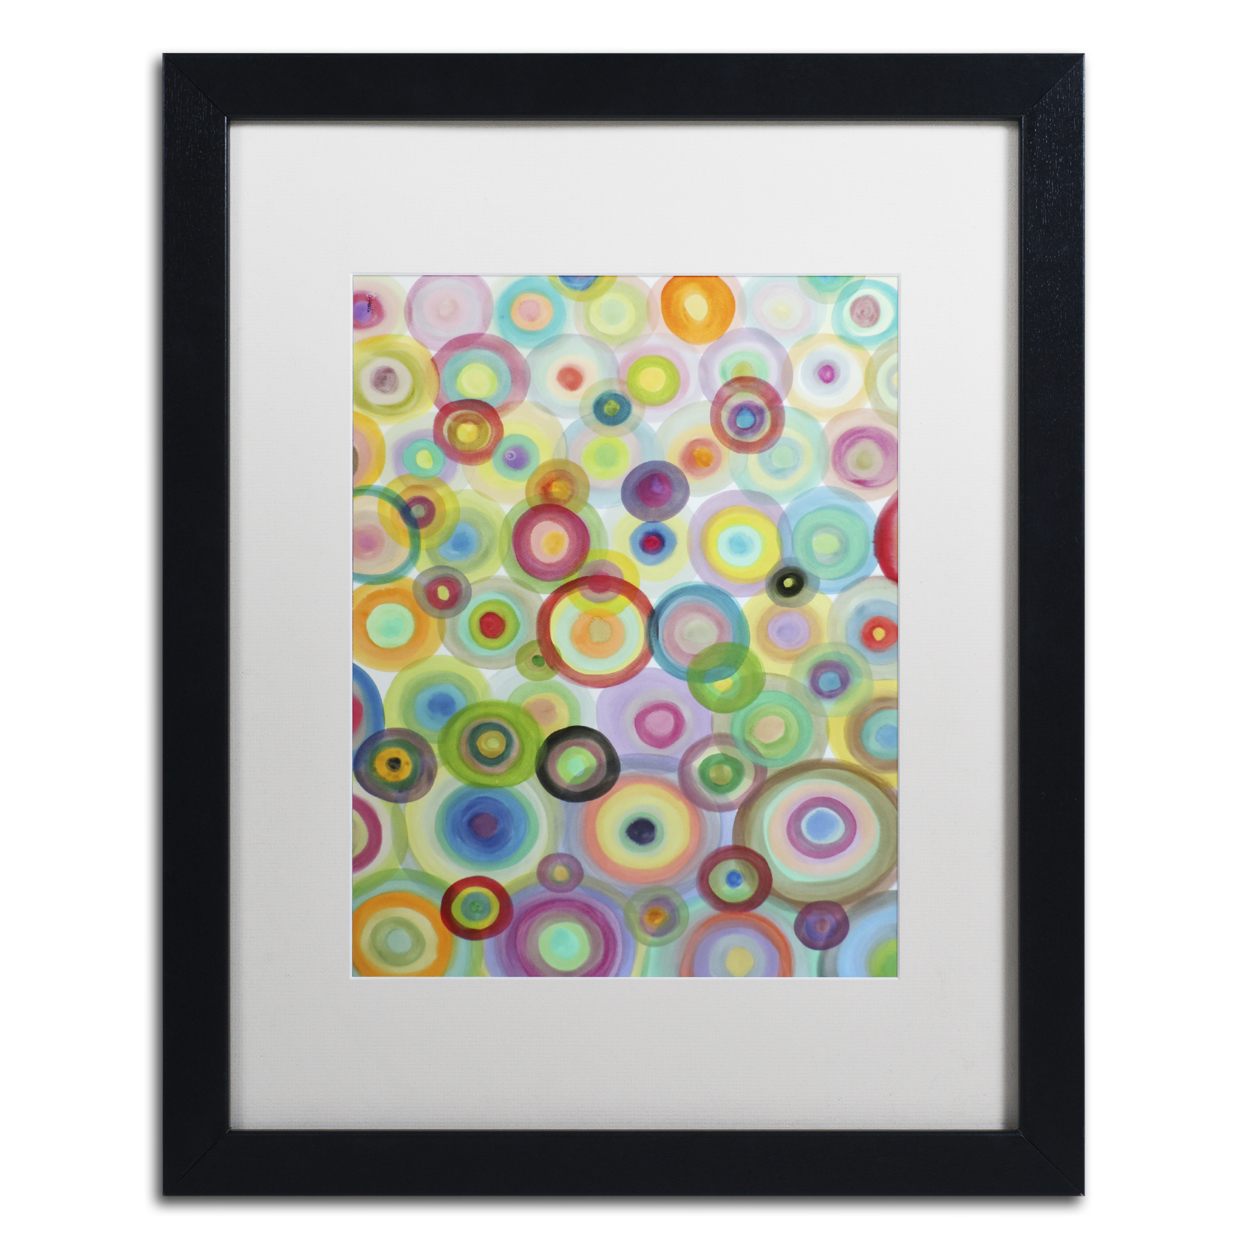 Sylvie Demers 'Bulles' Black Wooden Framed Art 18 X 22 Inches